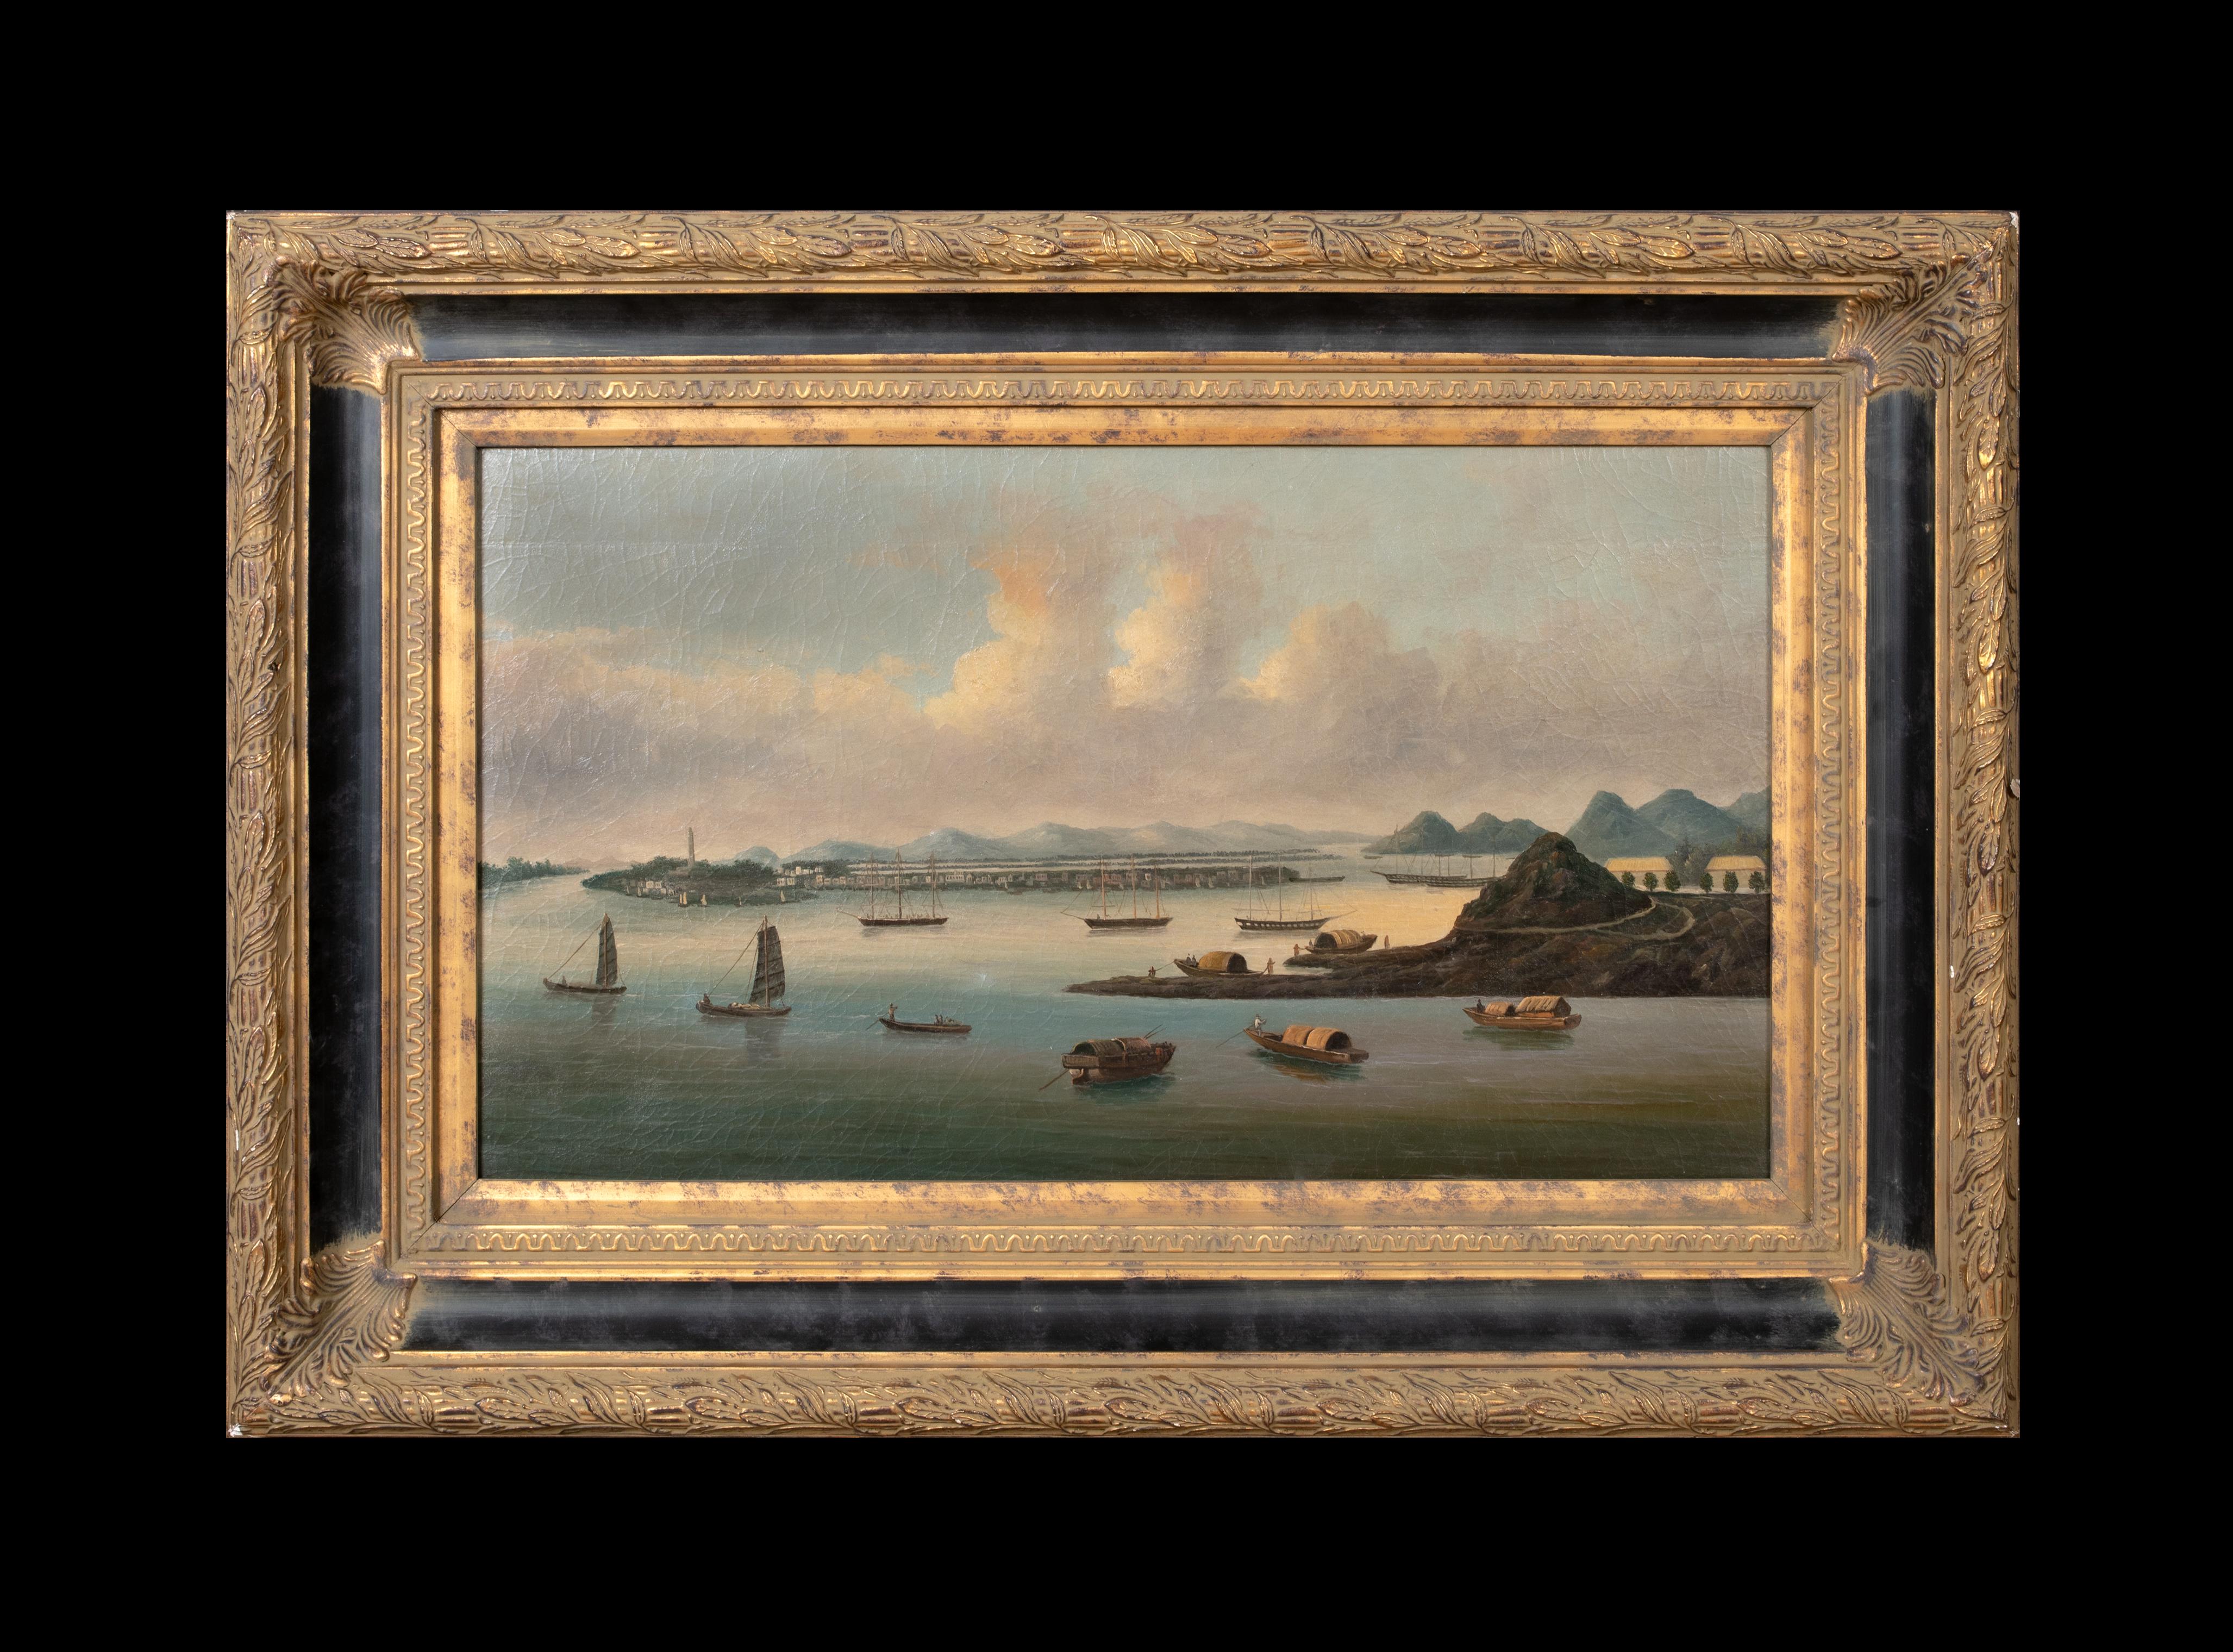 View Of Whampoa Anchorage China, 19th Century  Chinese Trade Export Port - Painting by Unknown